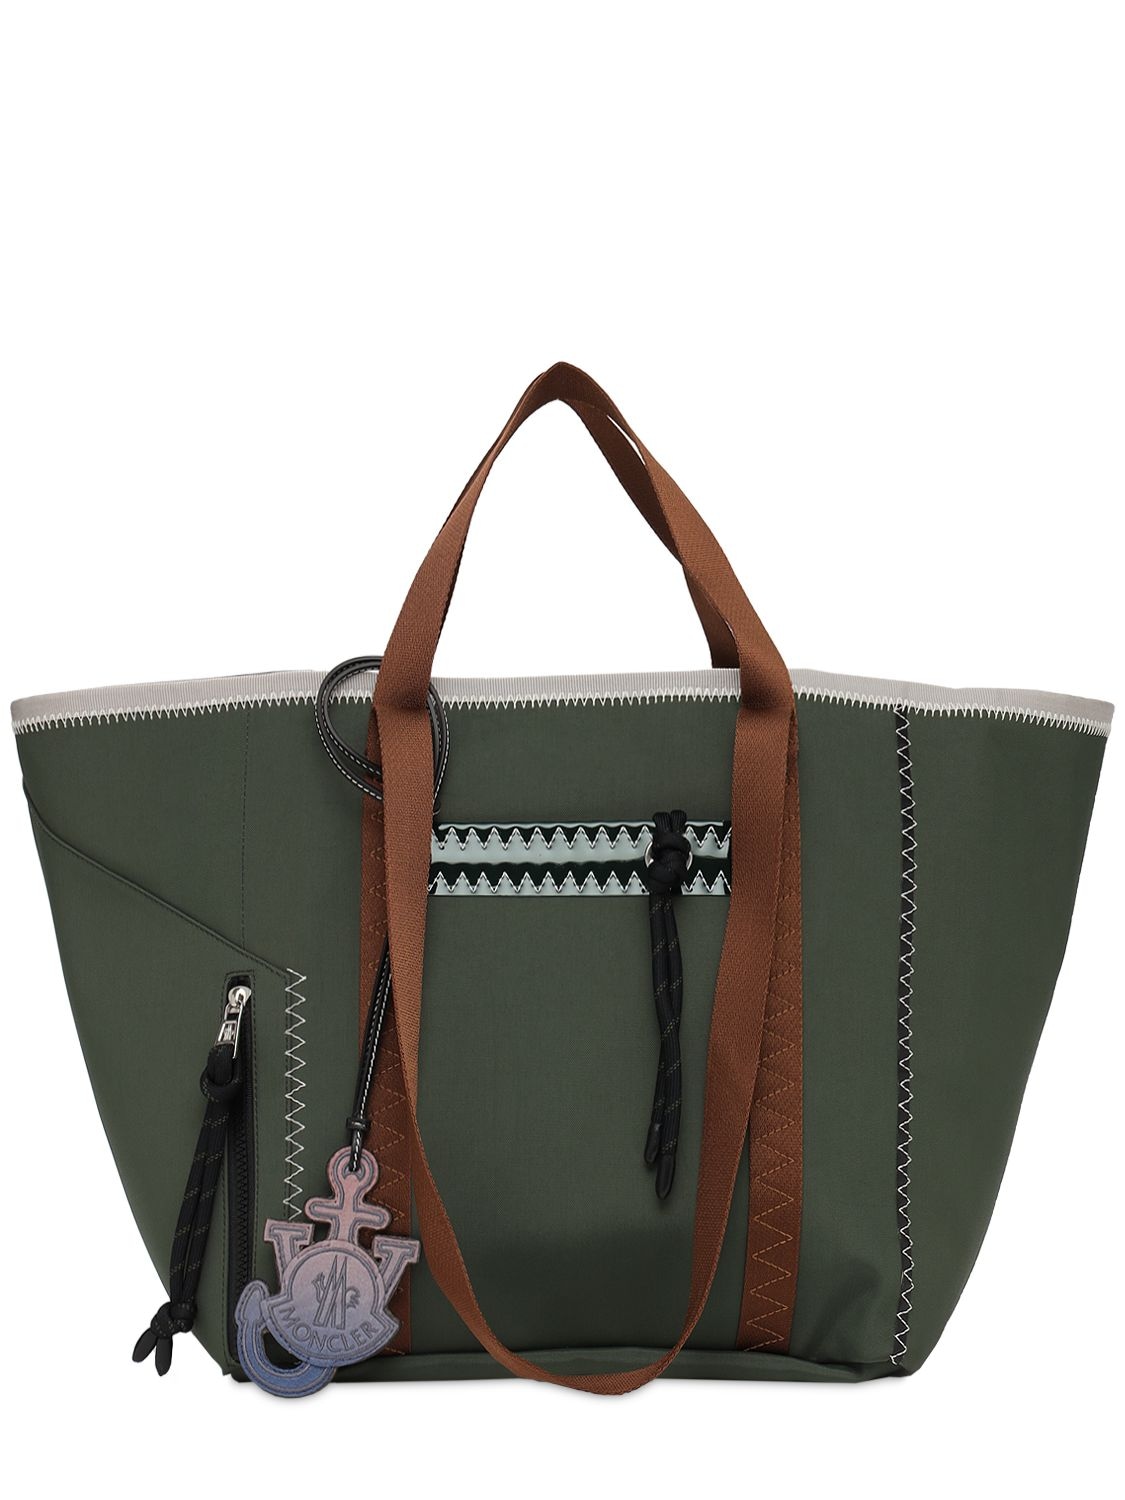 Moncler Genius Jw Anderson Tote Bag In Olive Green | ModeSens